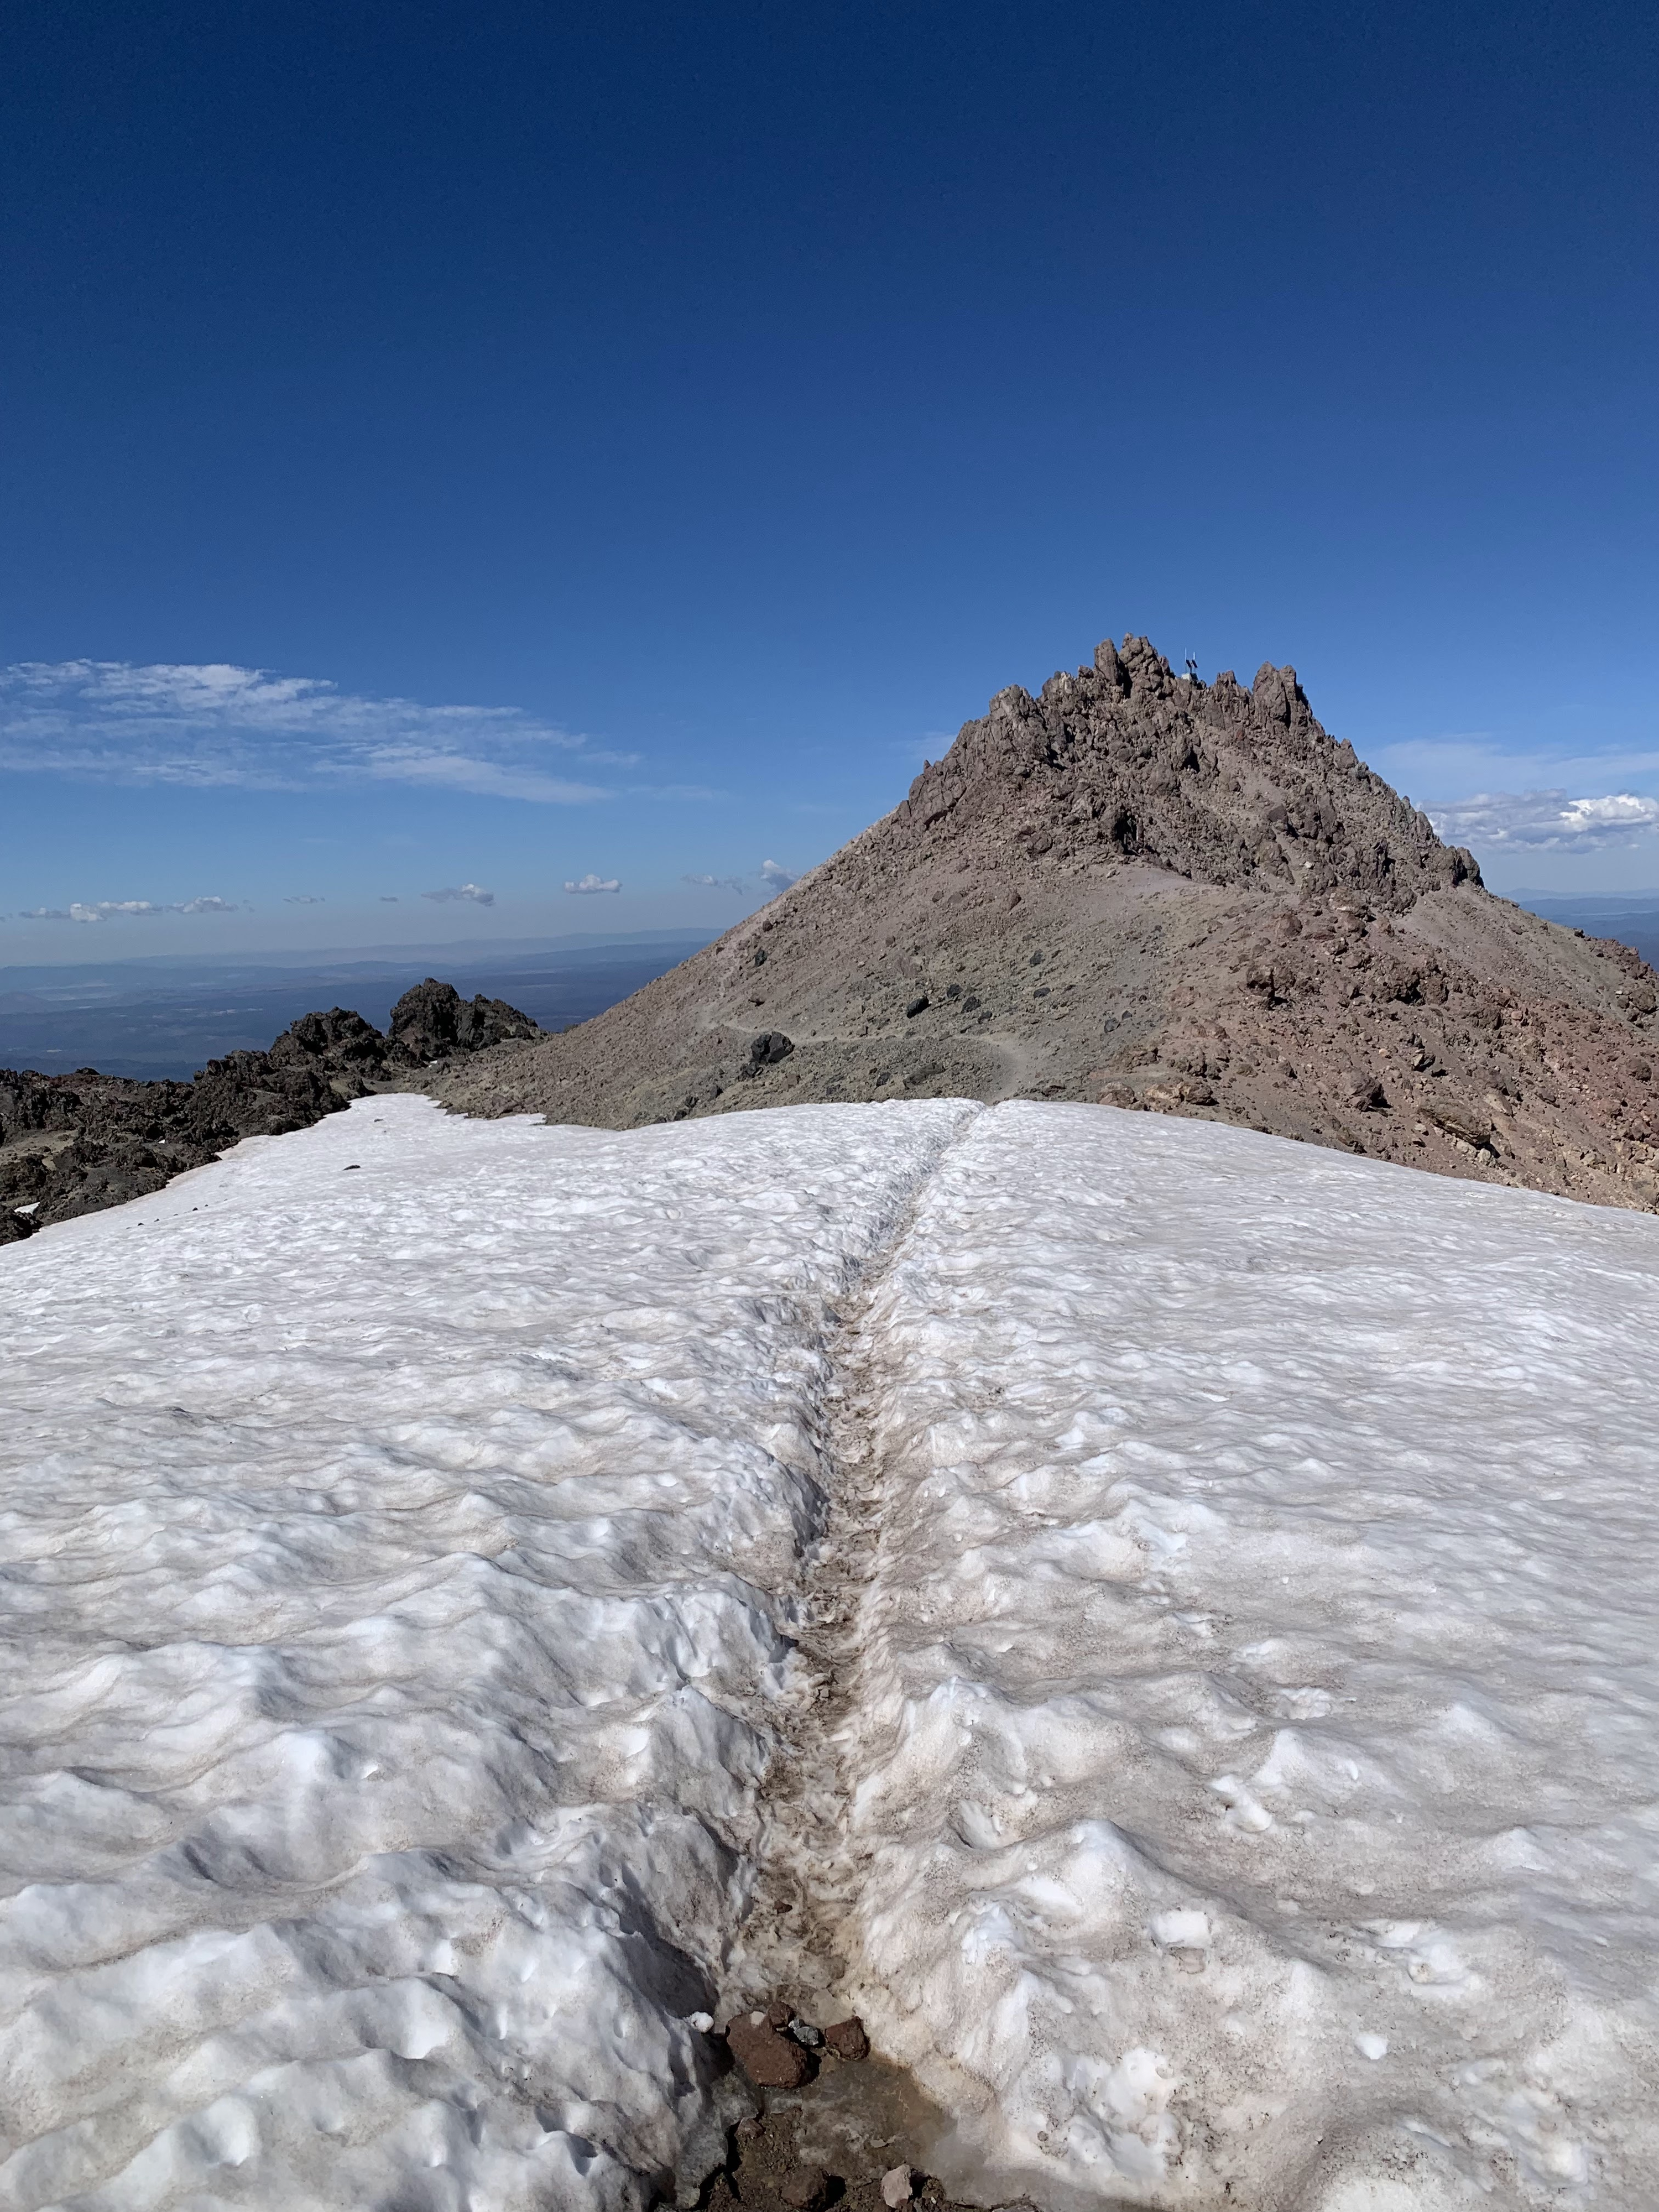 Braving the snowpack: Catching up with the Pacfic Crest Trail hikers